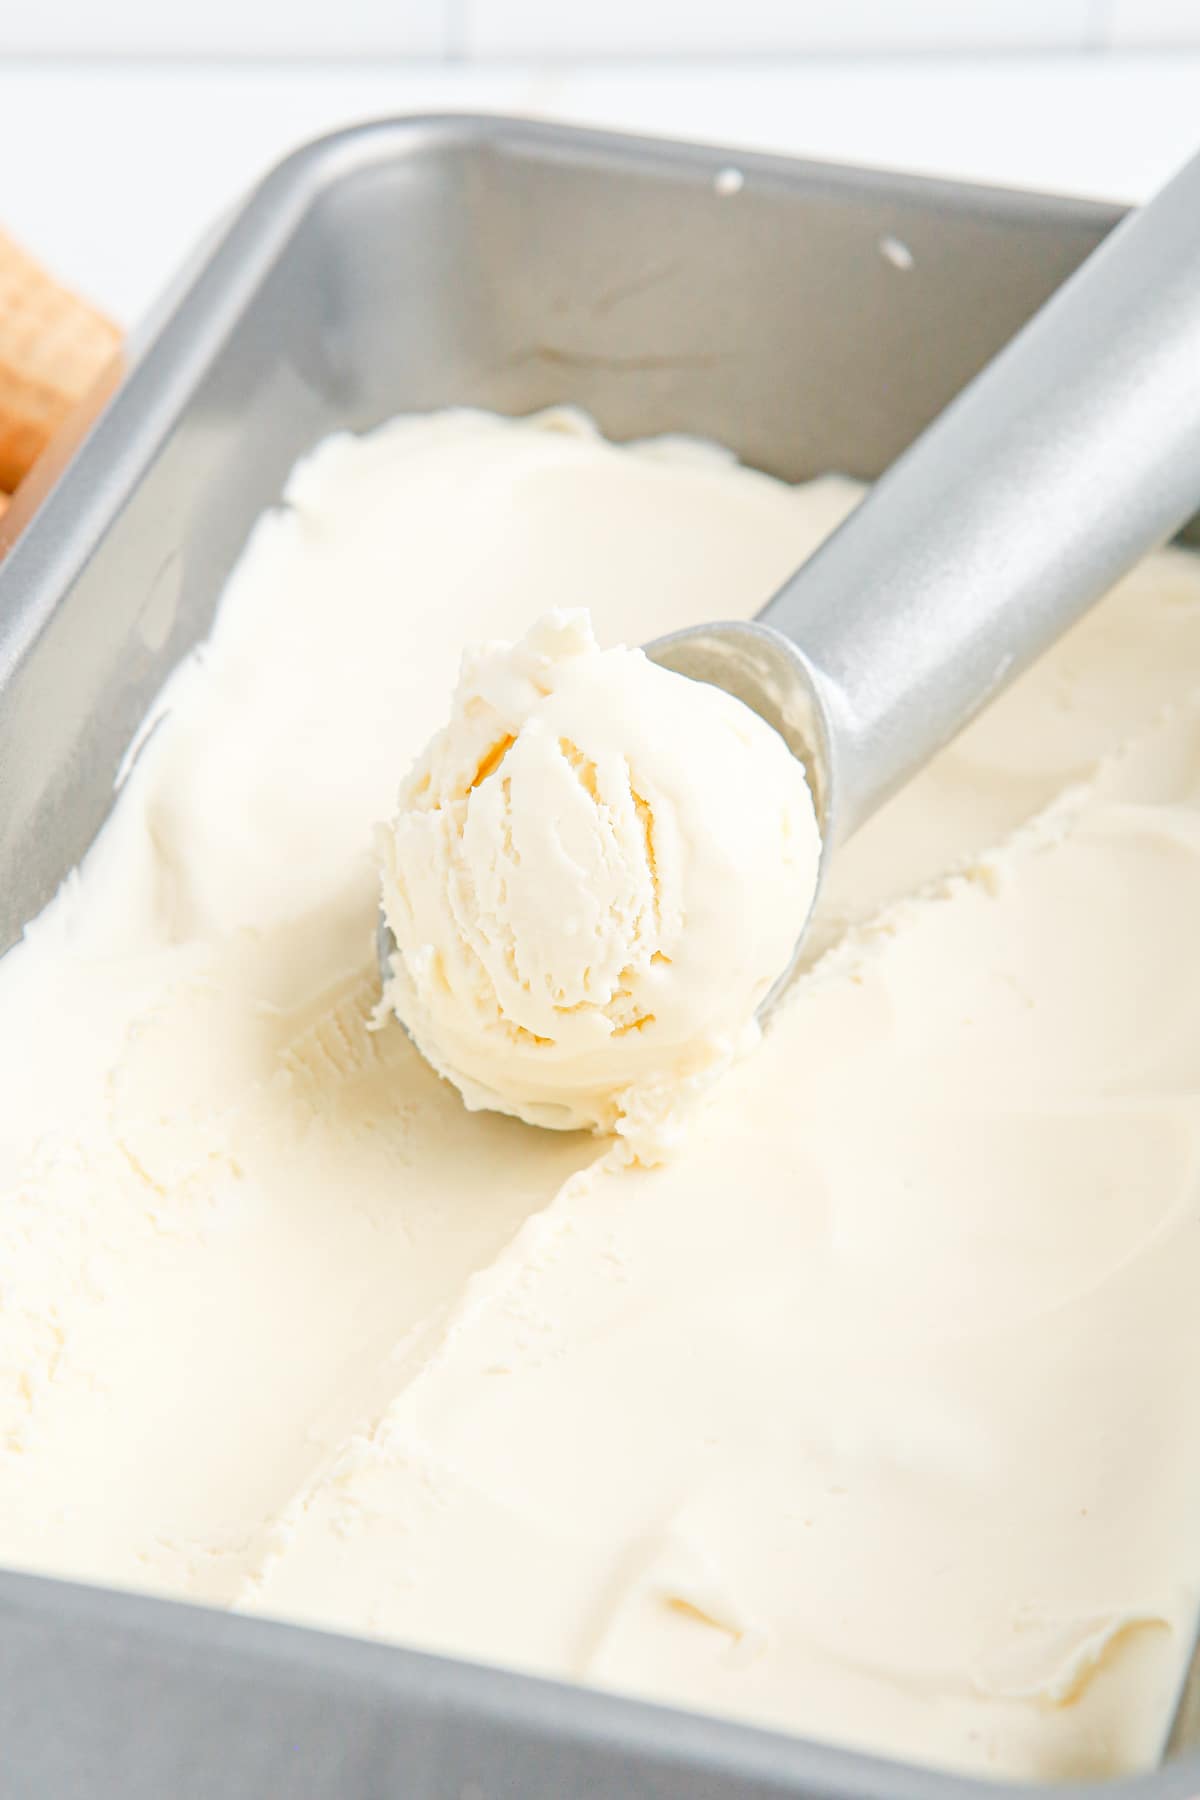 An ice cream scoop scooping vanilla ice cream from a loaf pan